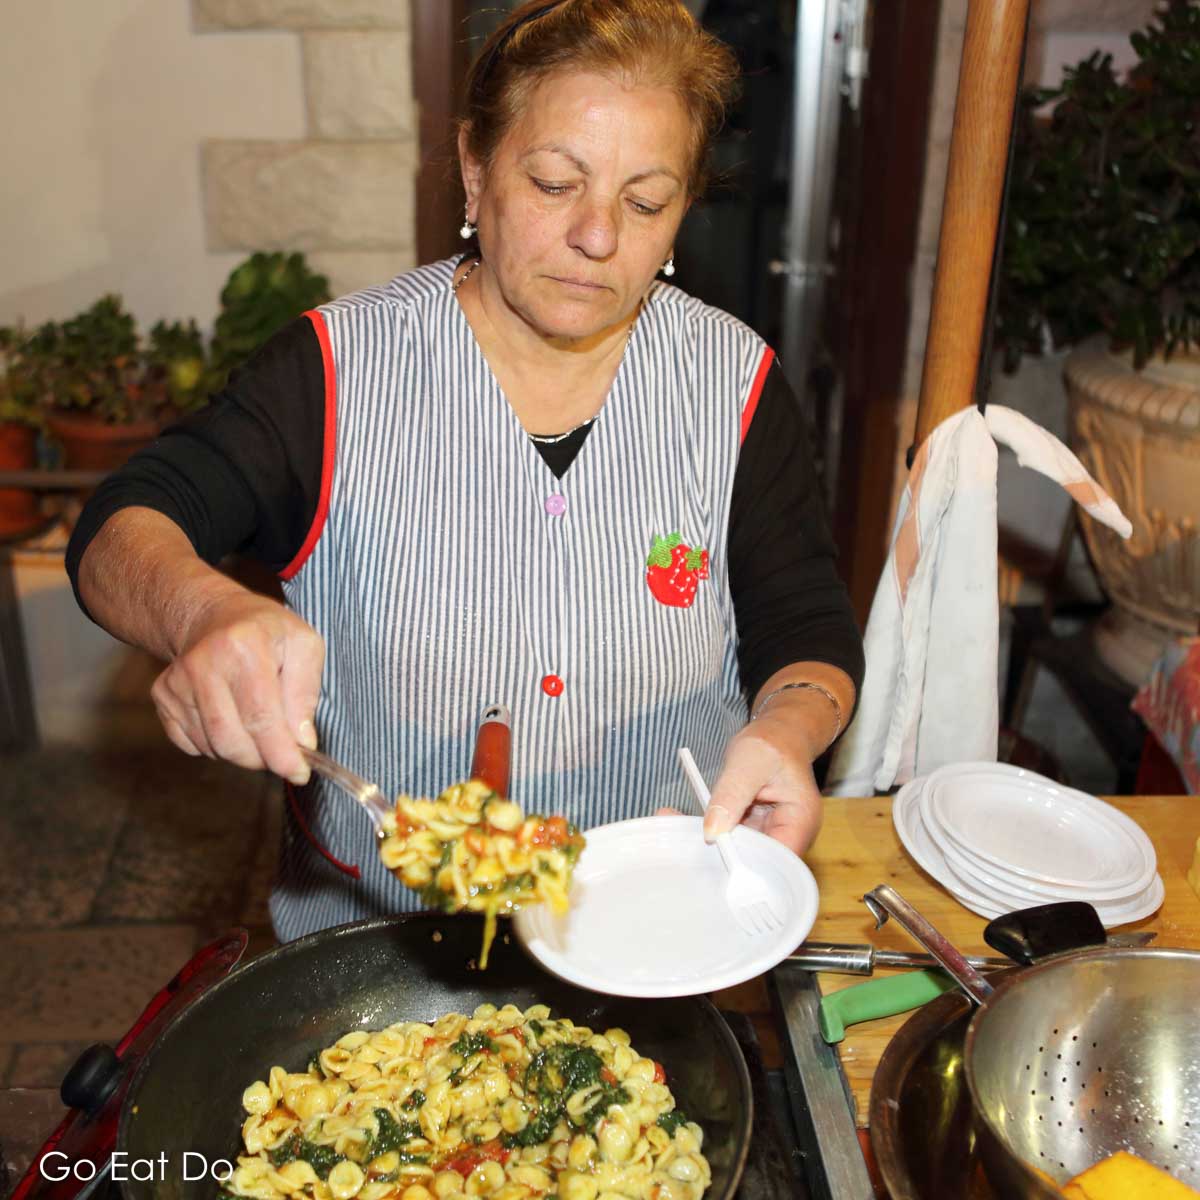 Carmela, a local woman, serves orecchiette, a local pasta dish, at an outdoor kitchen during a food tour of Bari.